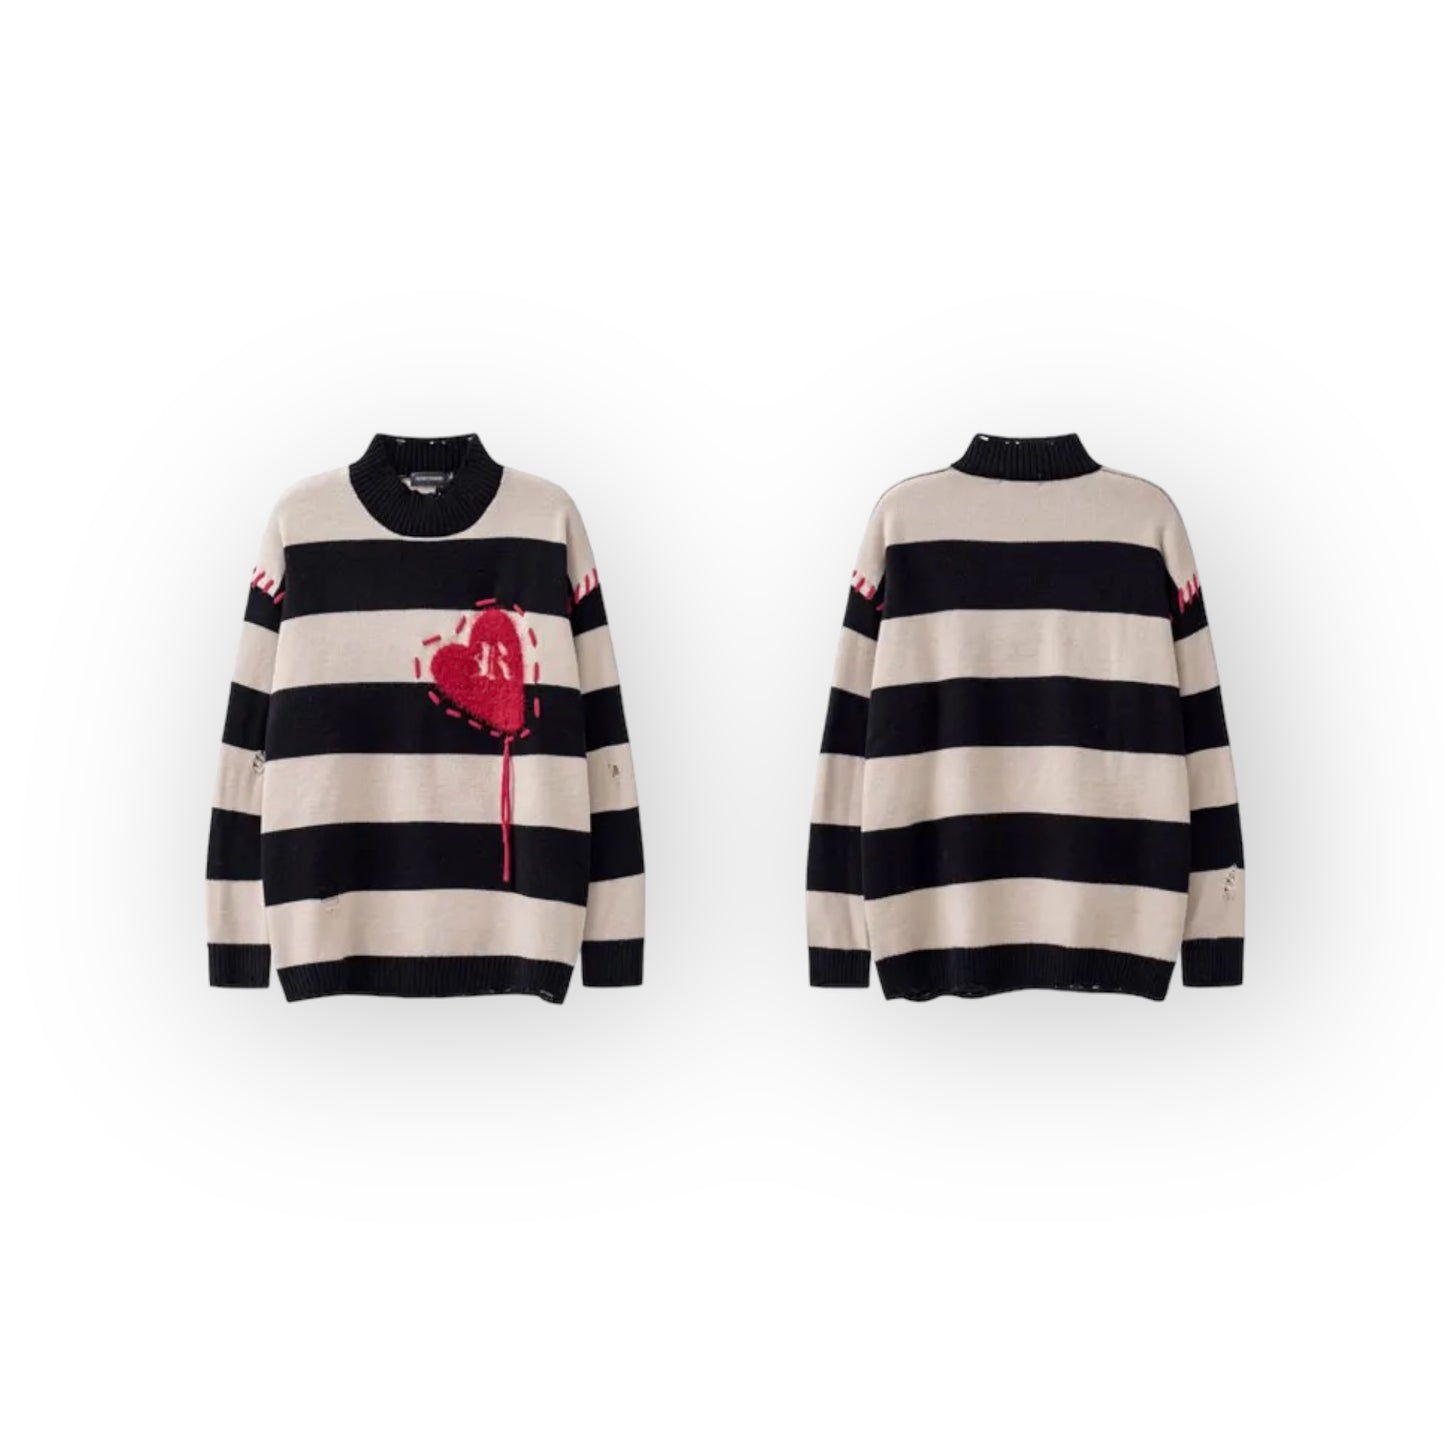 GONTHWID Ripped Knitted Heart Black Striped Holes Jumper